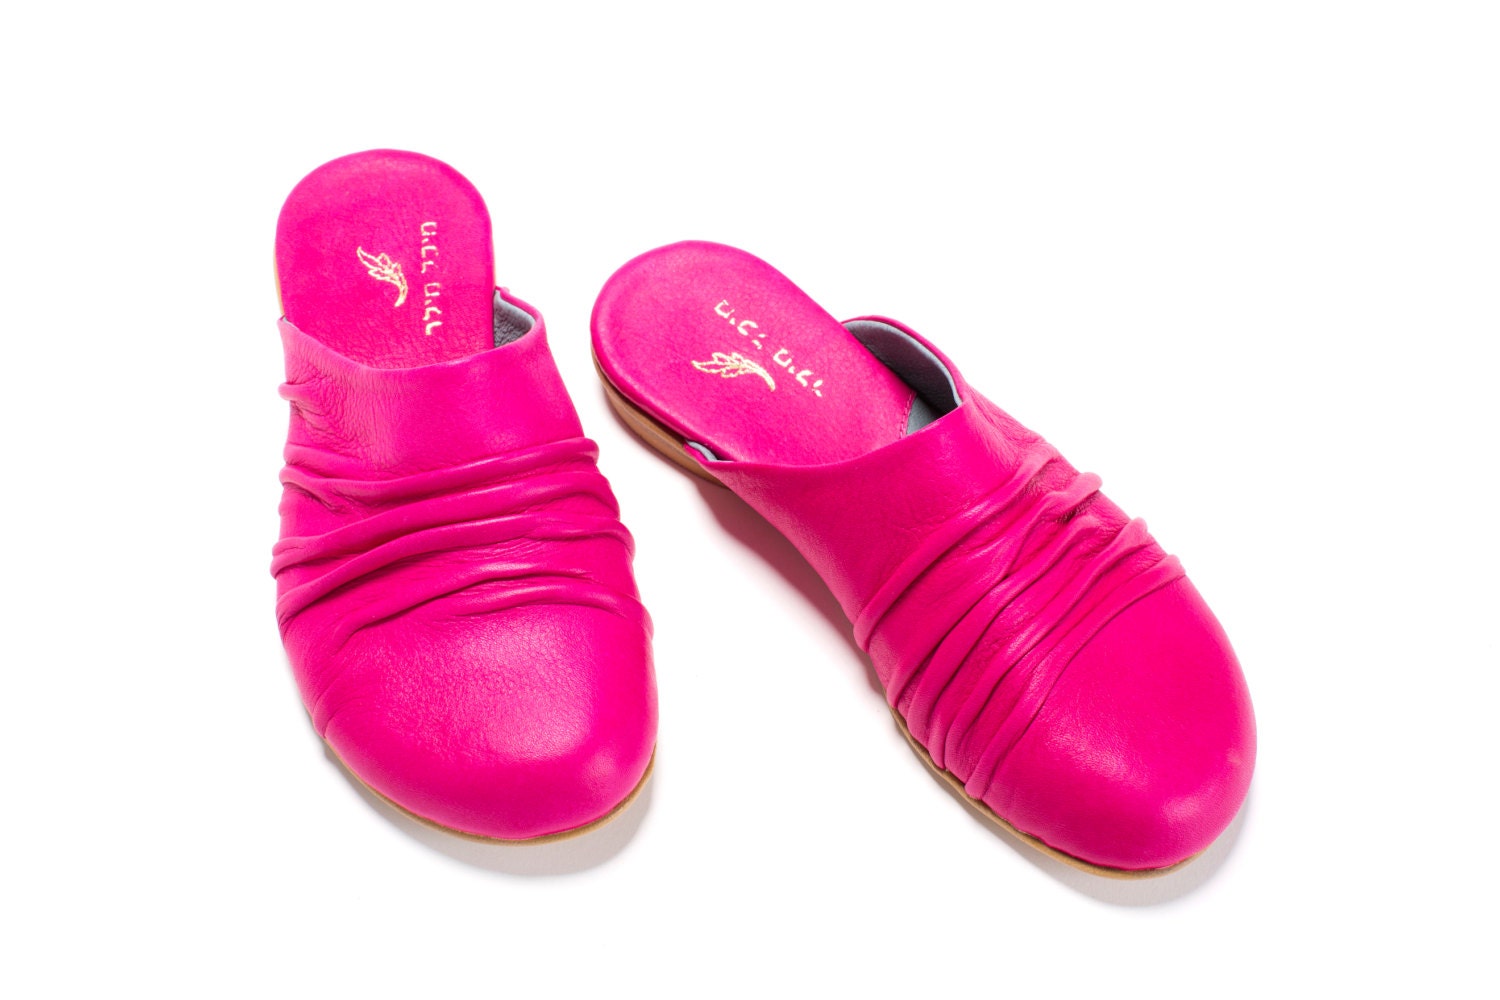 Pil Pink Clogs, Summer Shoes, Leather Shoes, Women Shoes, Handmade - MichalMiller